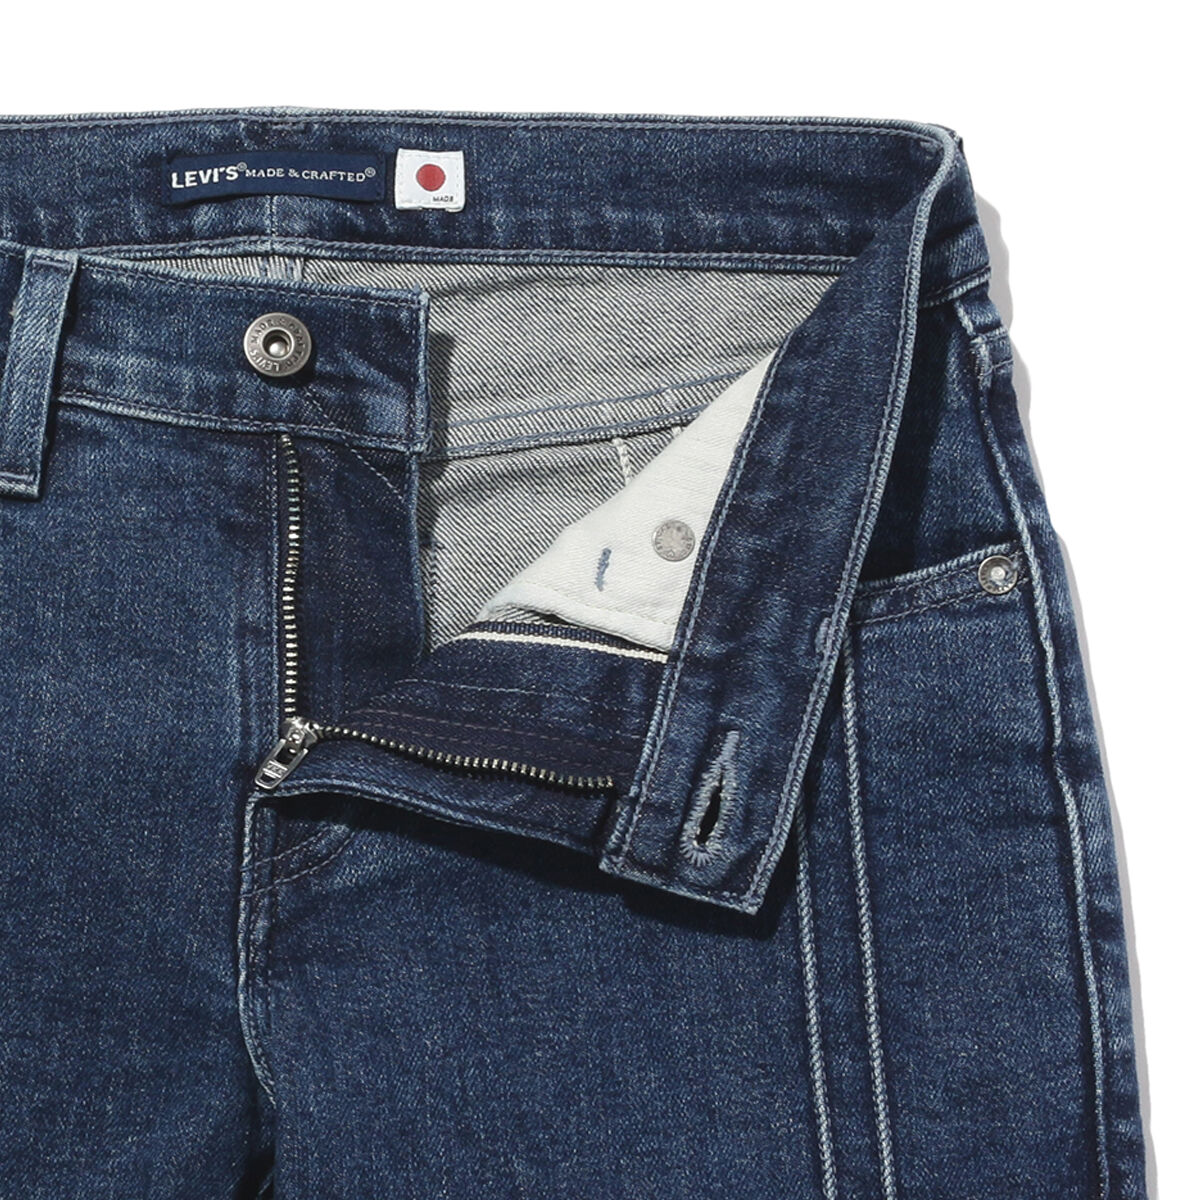 LEVI'S® MADE&CRAFTED®NEW BORROWED FROM THE BOYS S REI MADE IN